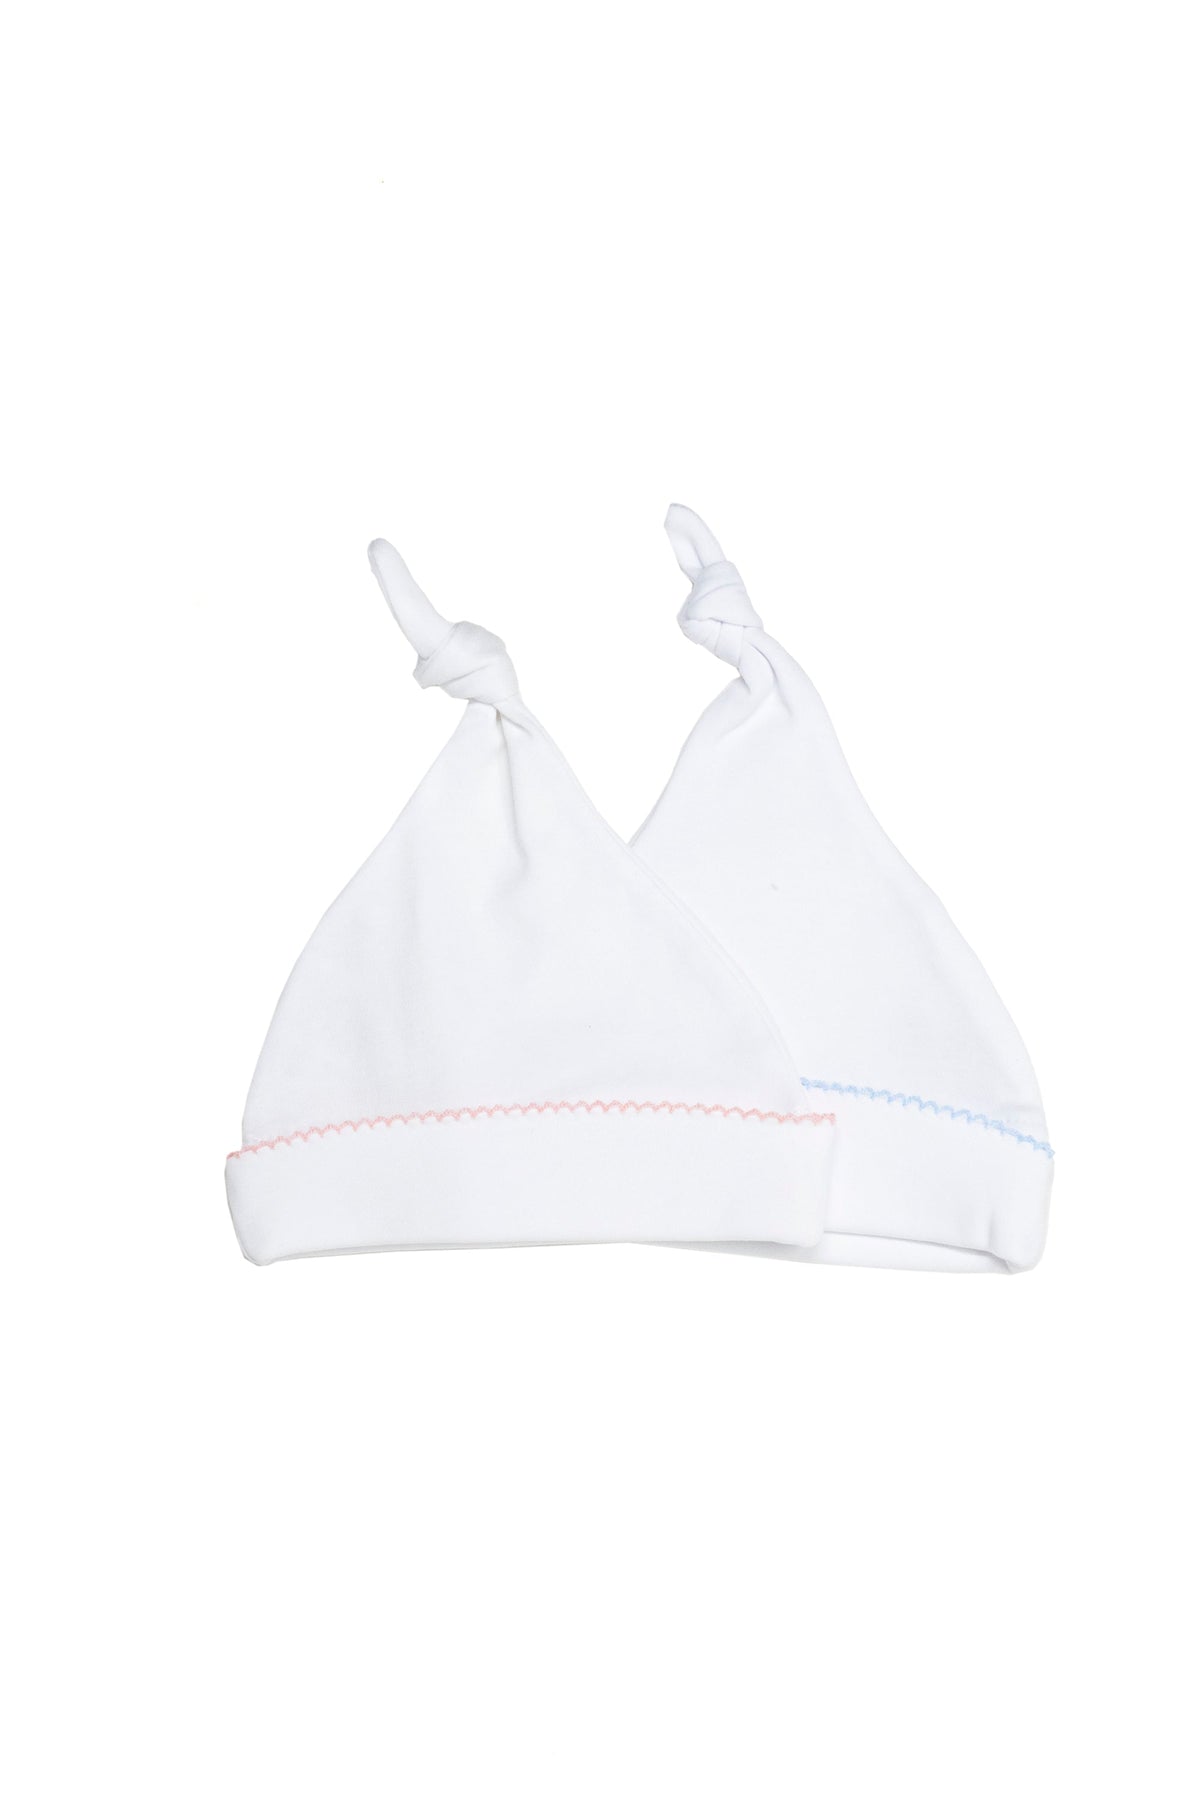 Baby Girl White Classic Knot Hat